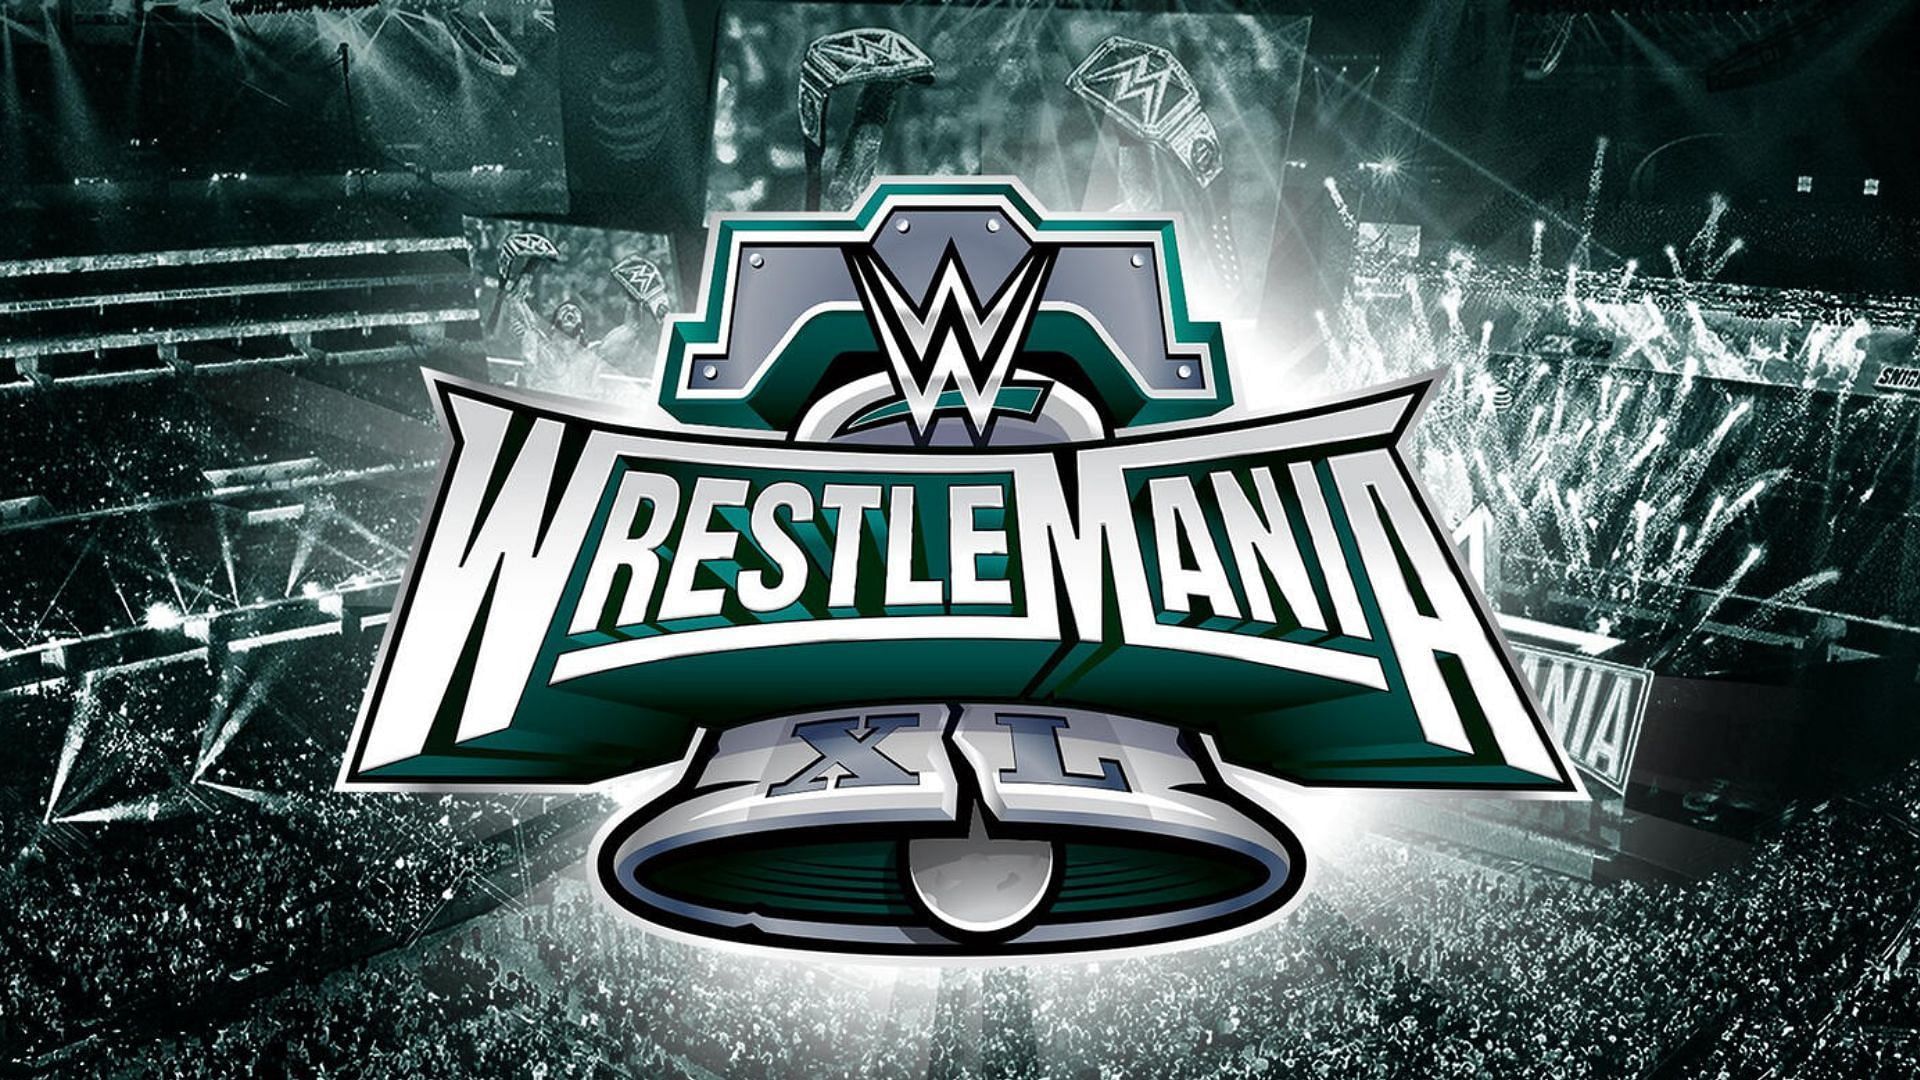 WrestleMania will air live this weekend.